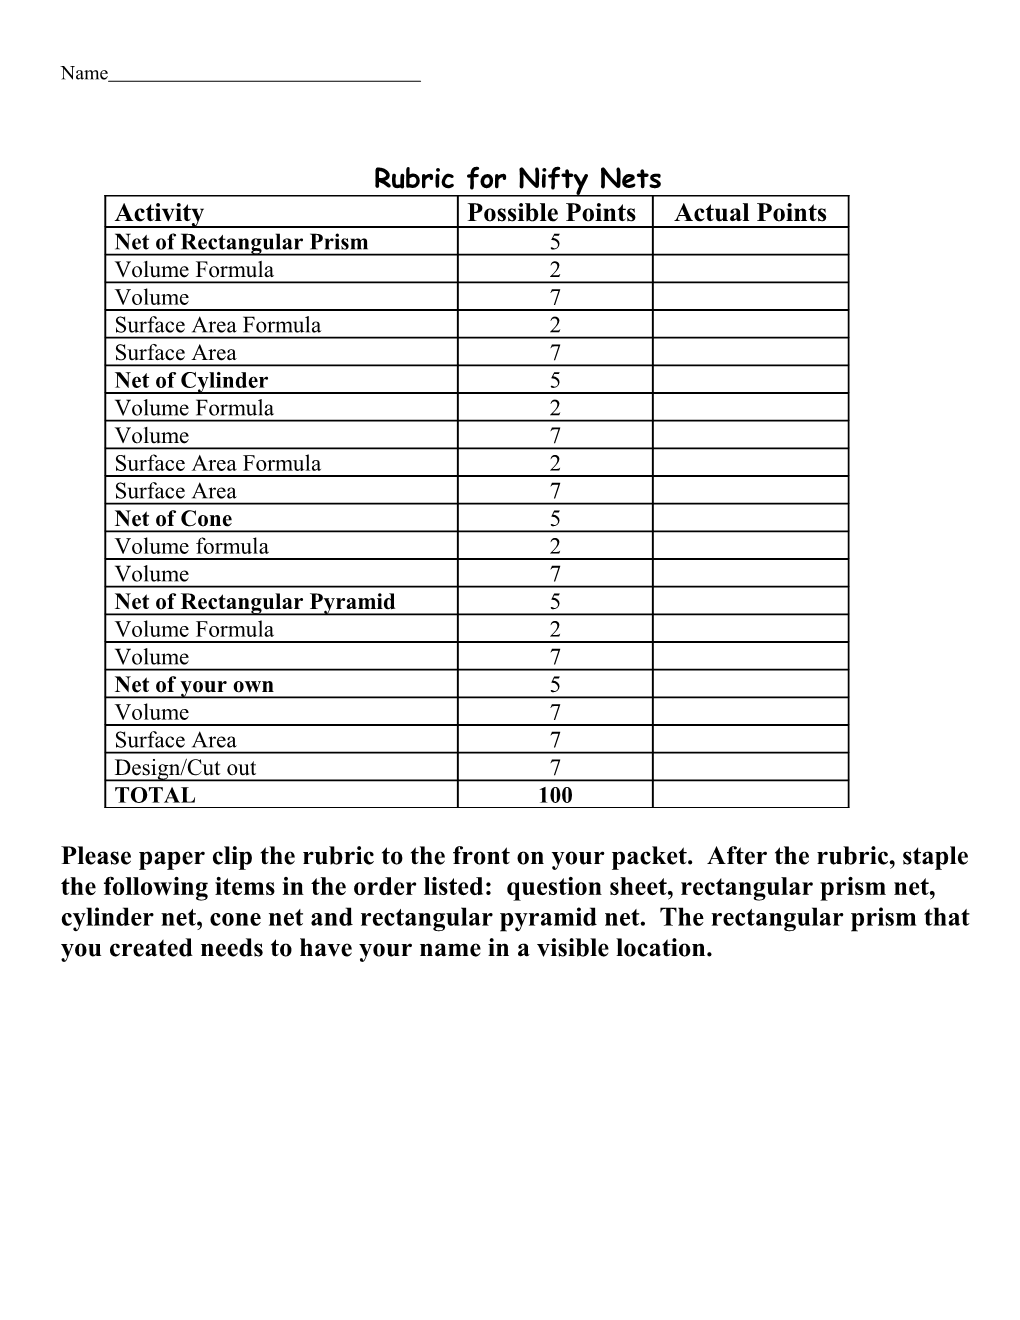 Rubric for Nifty Nets